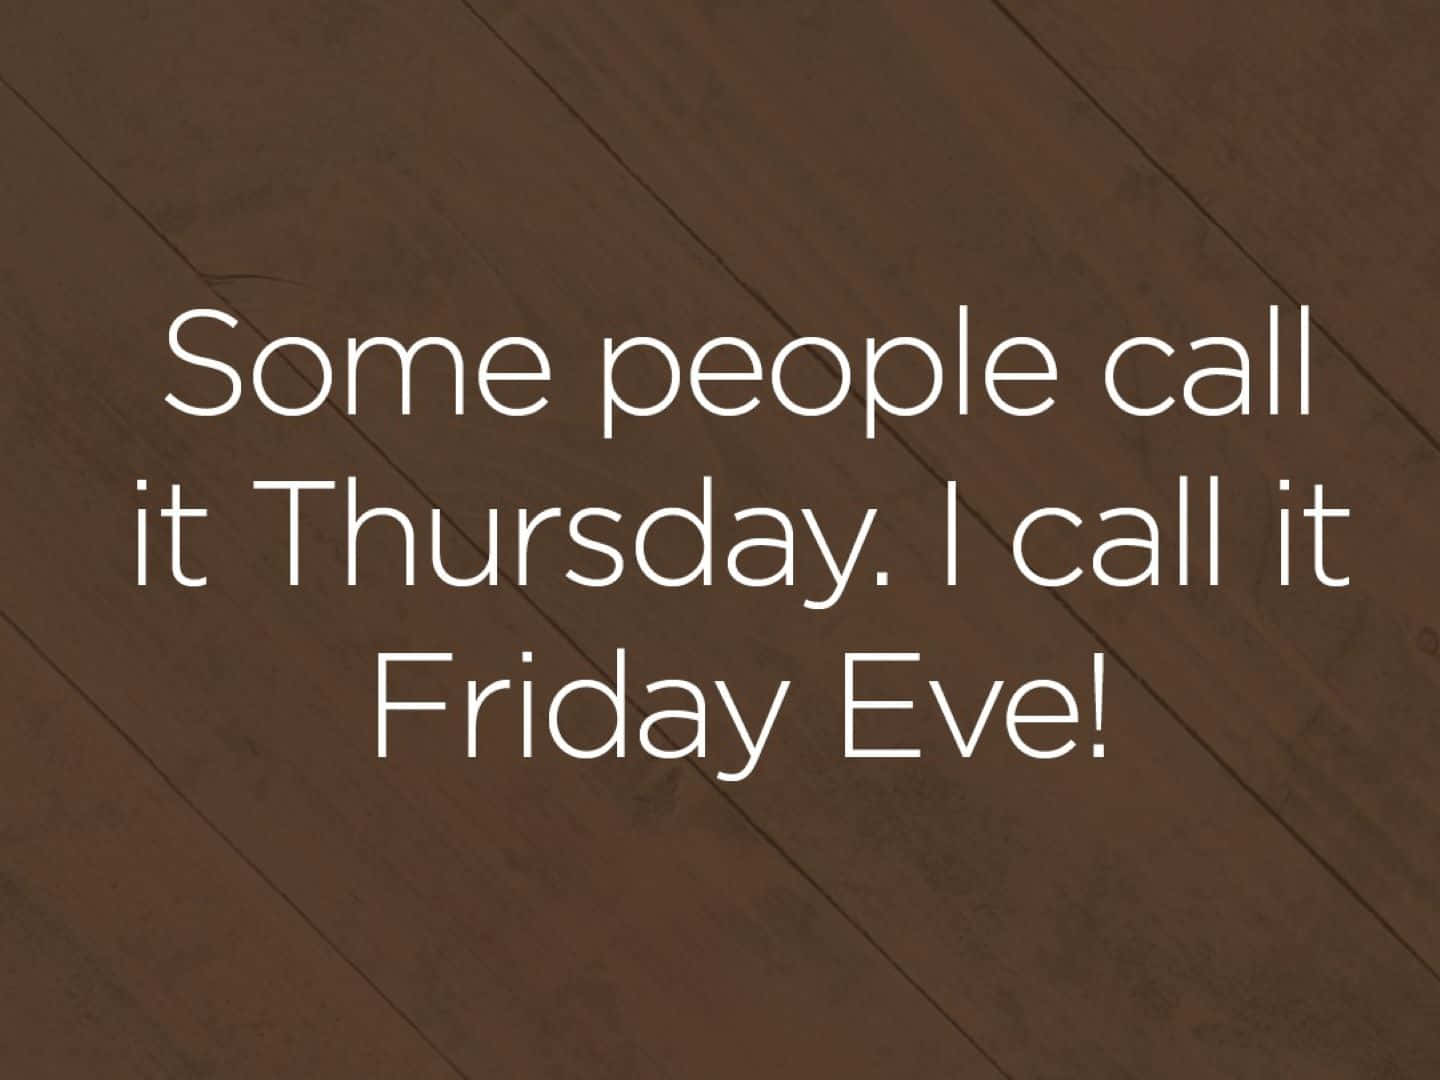 Thursday Friday Eve Quote Wallpaper